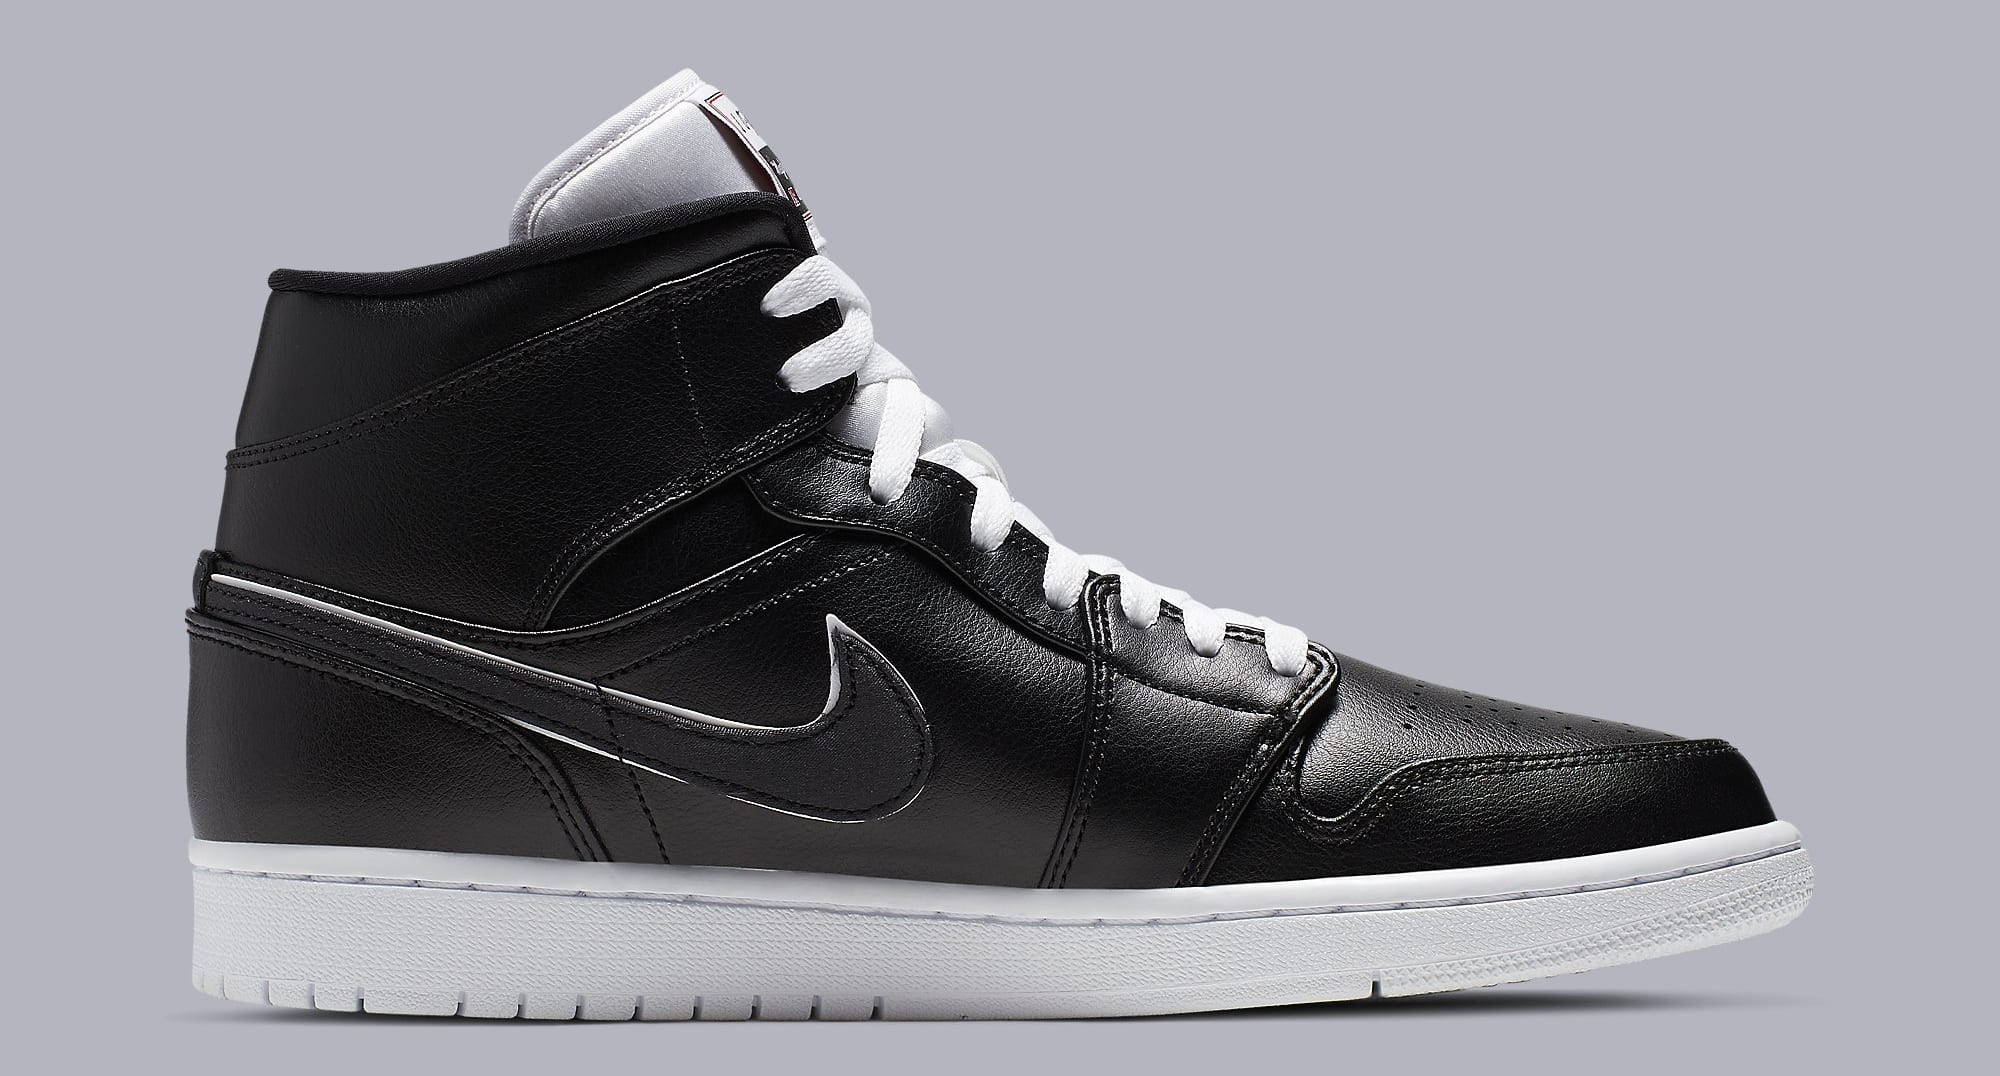 Air Jordan 1 Retro Mid 'Maybe I Destroyed the Game' Release Date